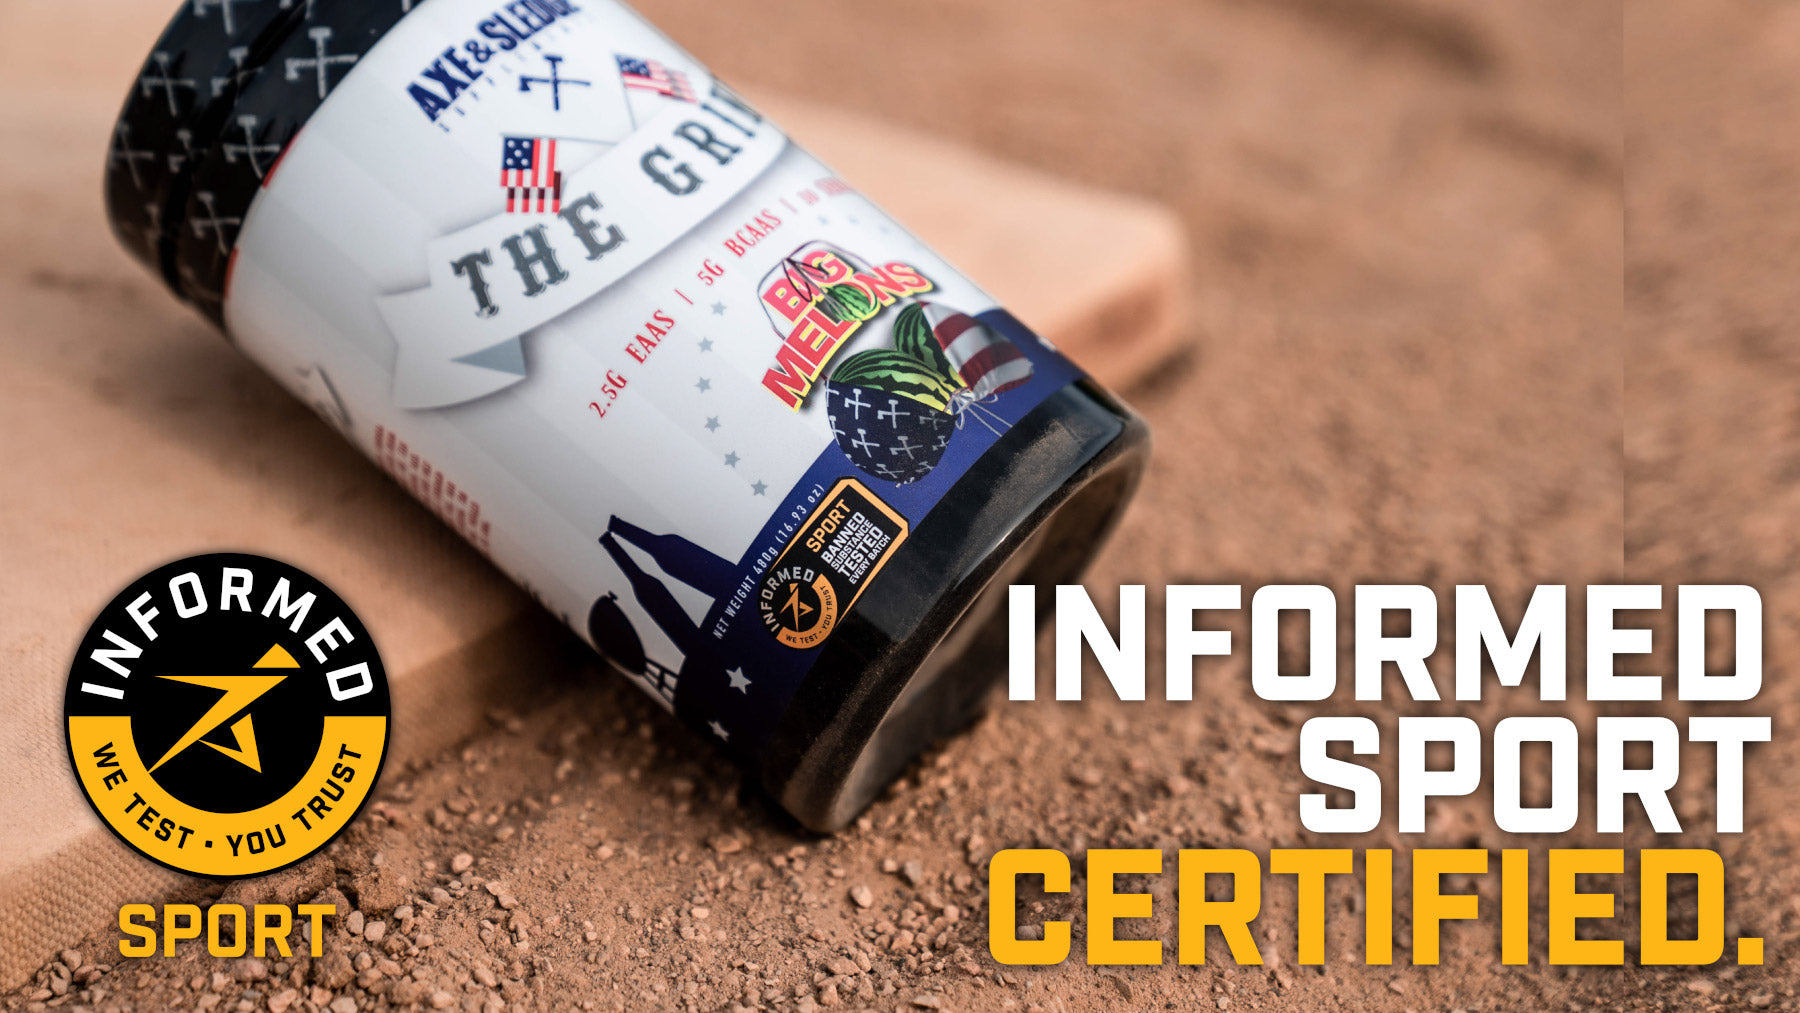 The Grind & Hydraulic Are Officially Informed-Sport Certified